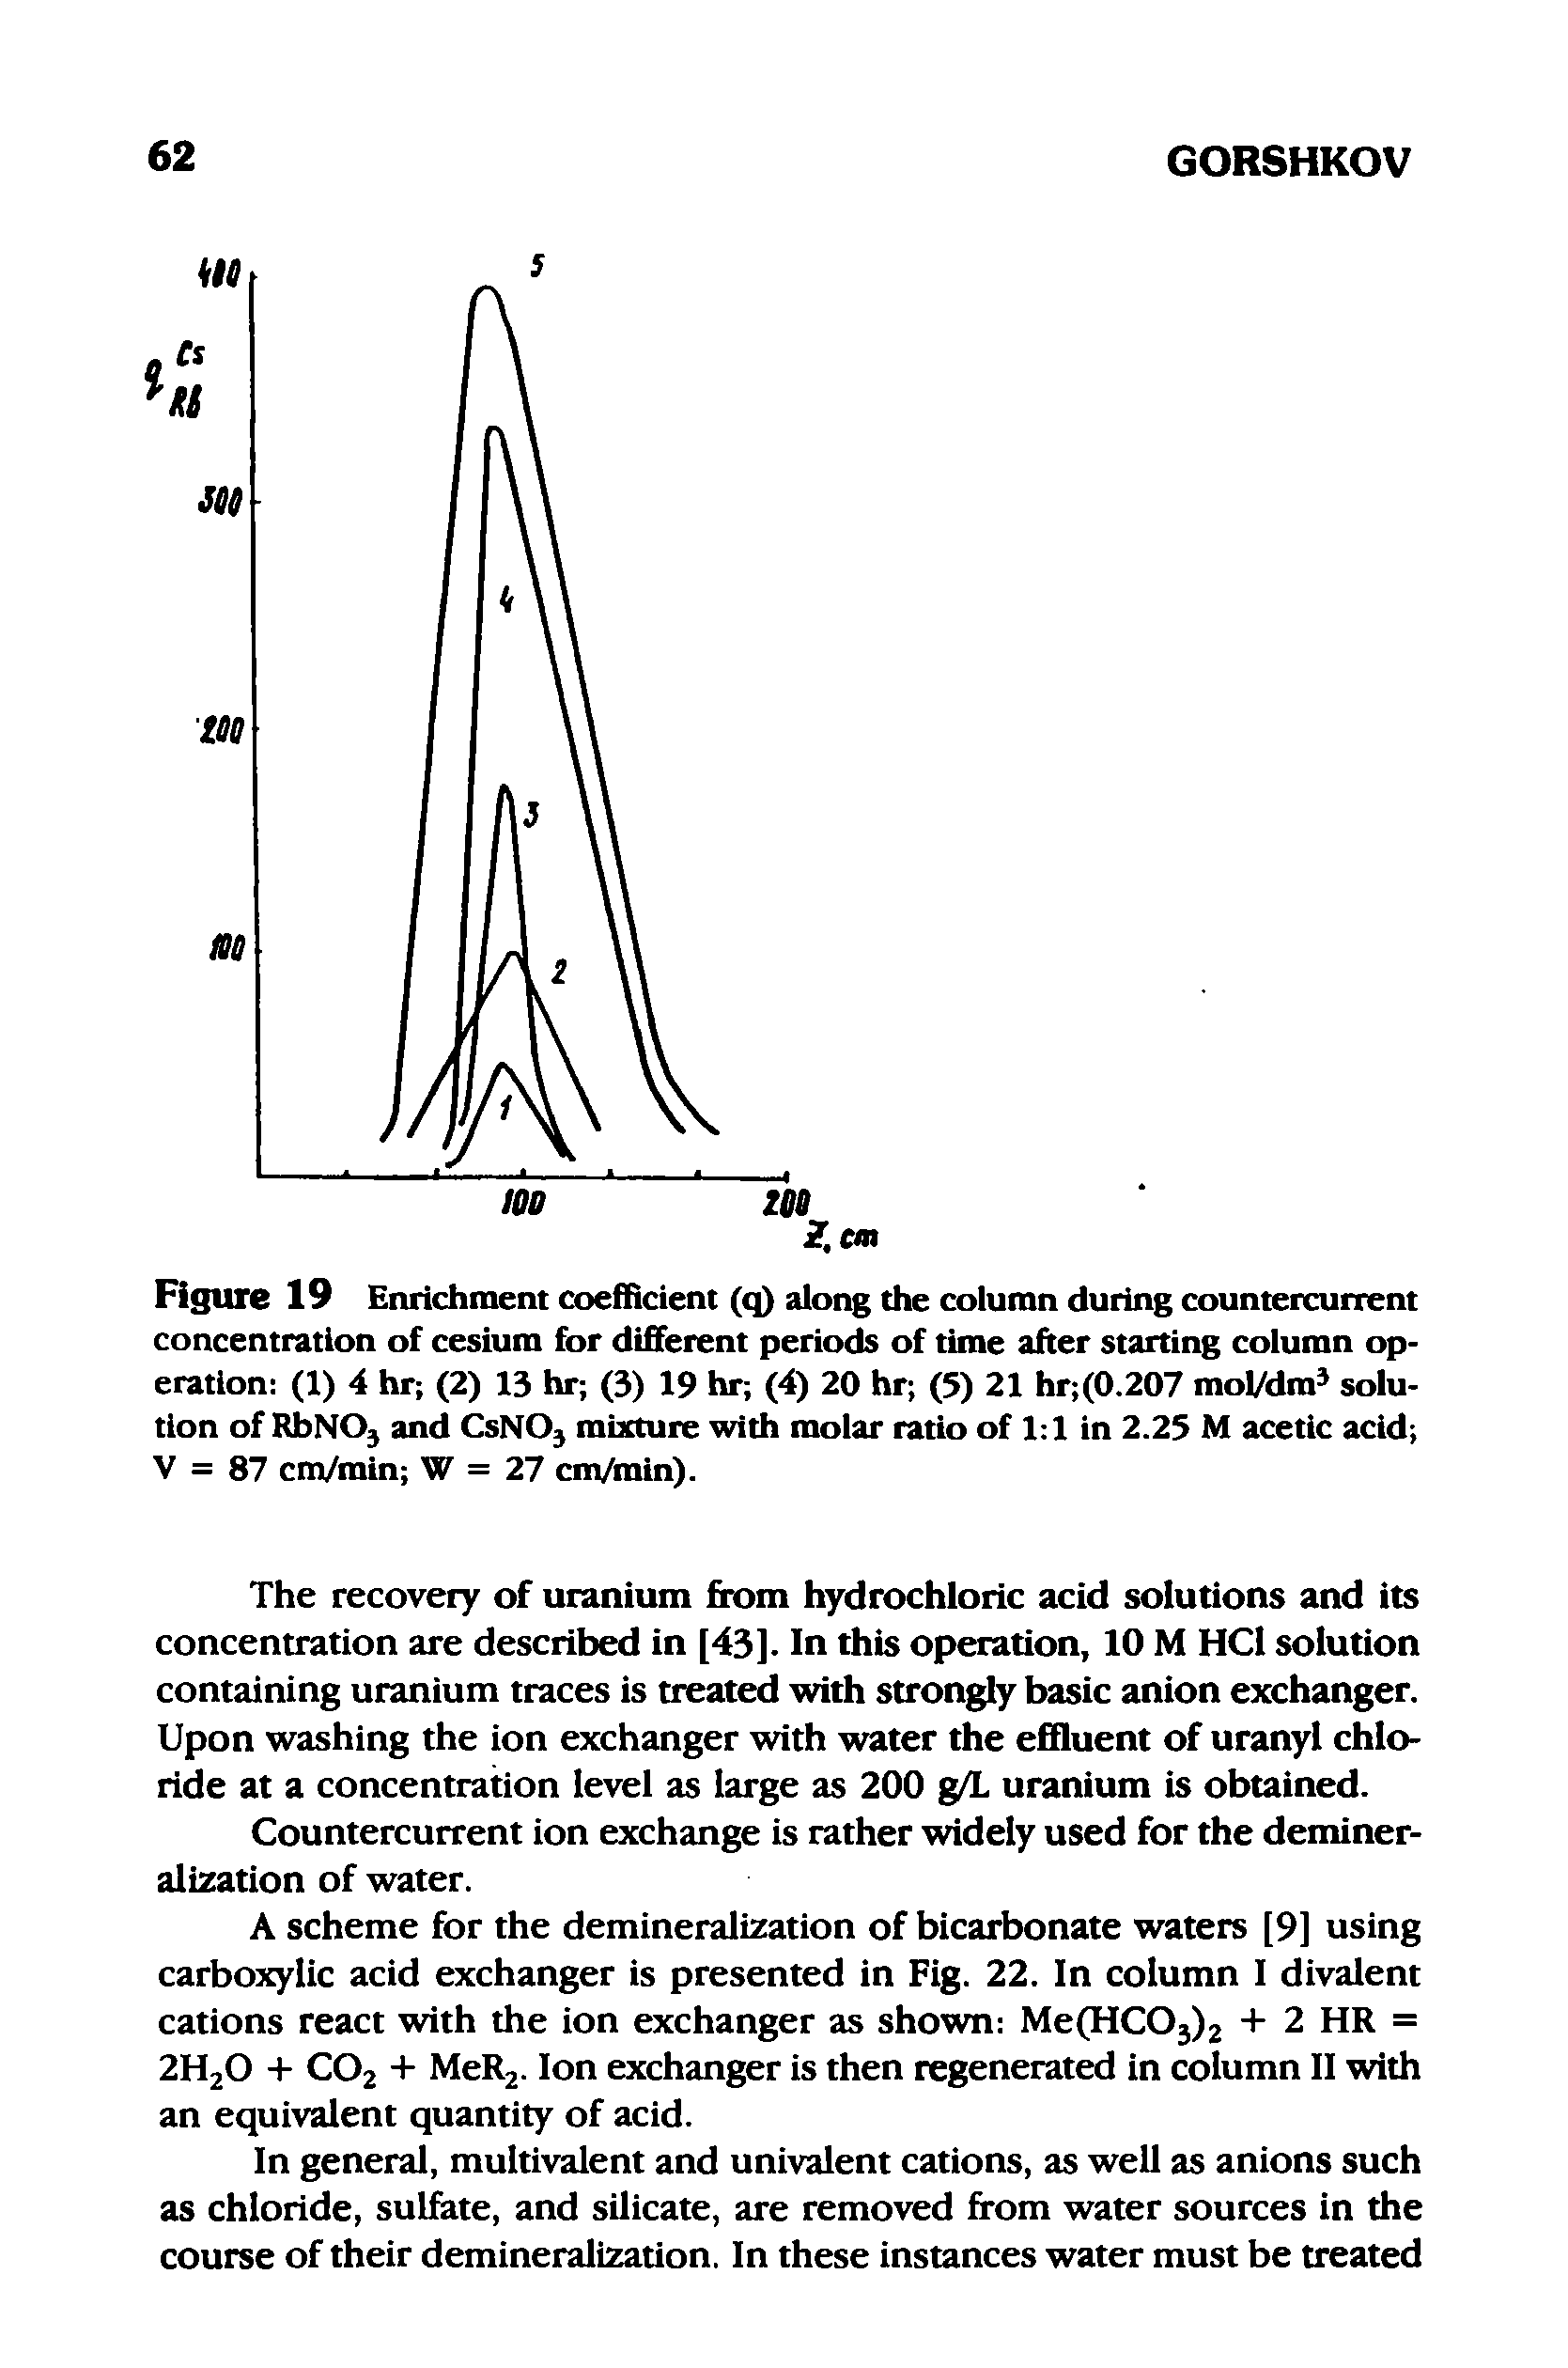 Figure 19 Enrichment coefRcient (q) along the column during countercurrent concentration of cesium for different periods of time after starting column operation (1) 4 hr (2) 13 hr (3) 19 hr (4) 20 hr (5) 21 hr (0.207 mol/dm solution of RbNOj and CsNOj mixture with molar ratio of 1 1 in 2.25 M acetic acid V = 87 cm/min W = 27 cm/min).